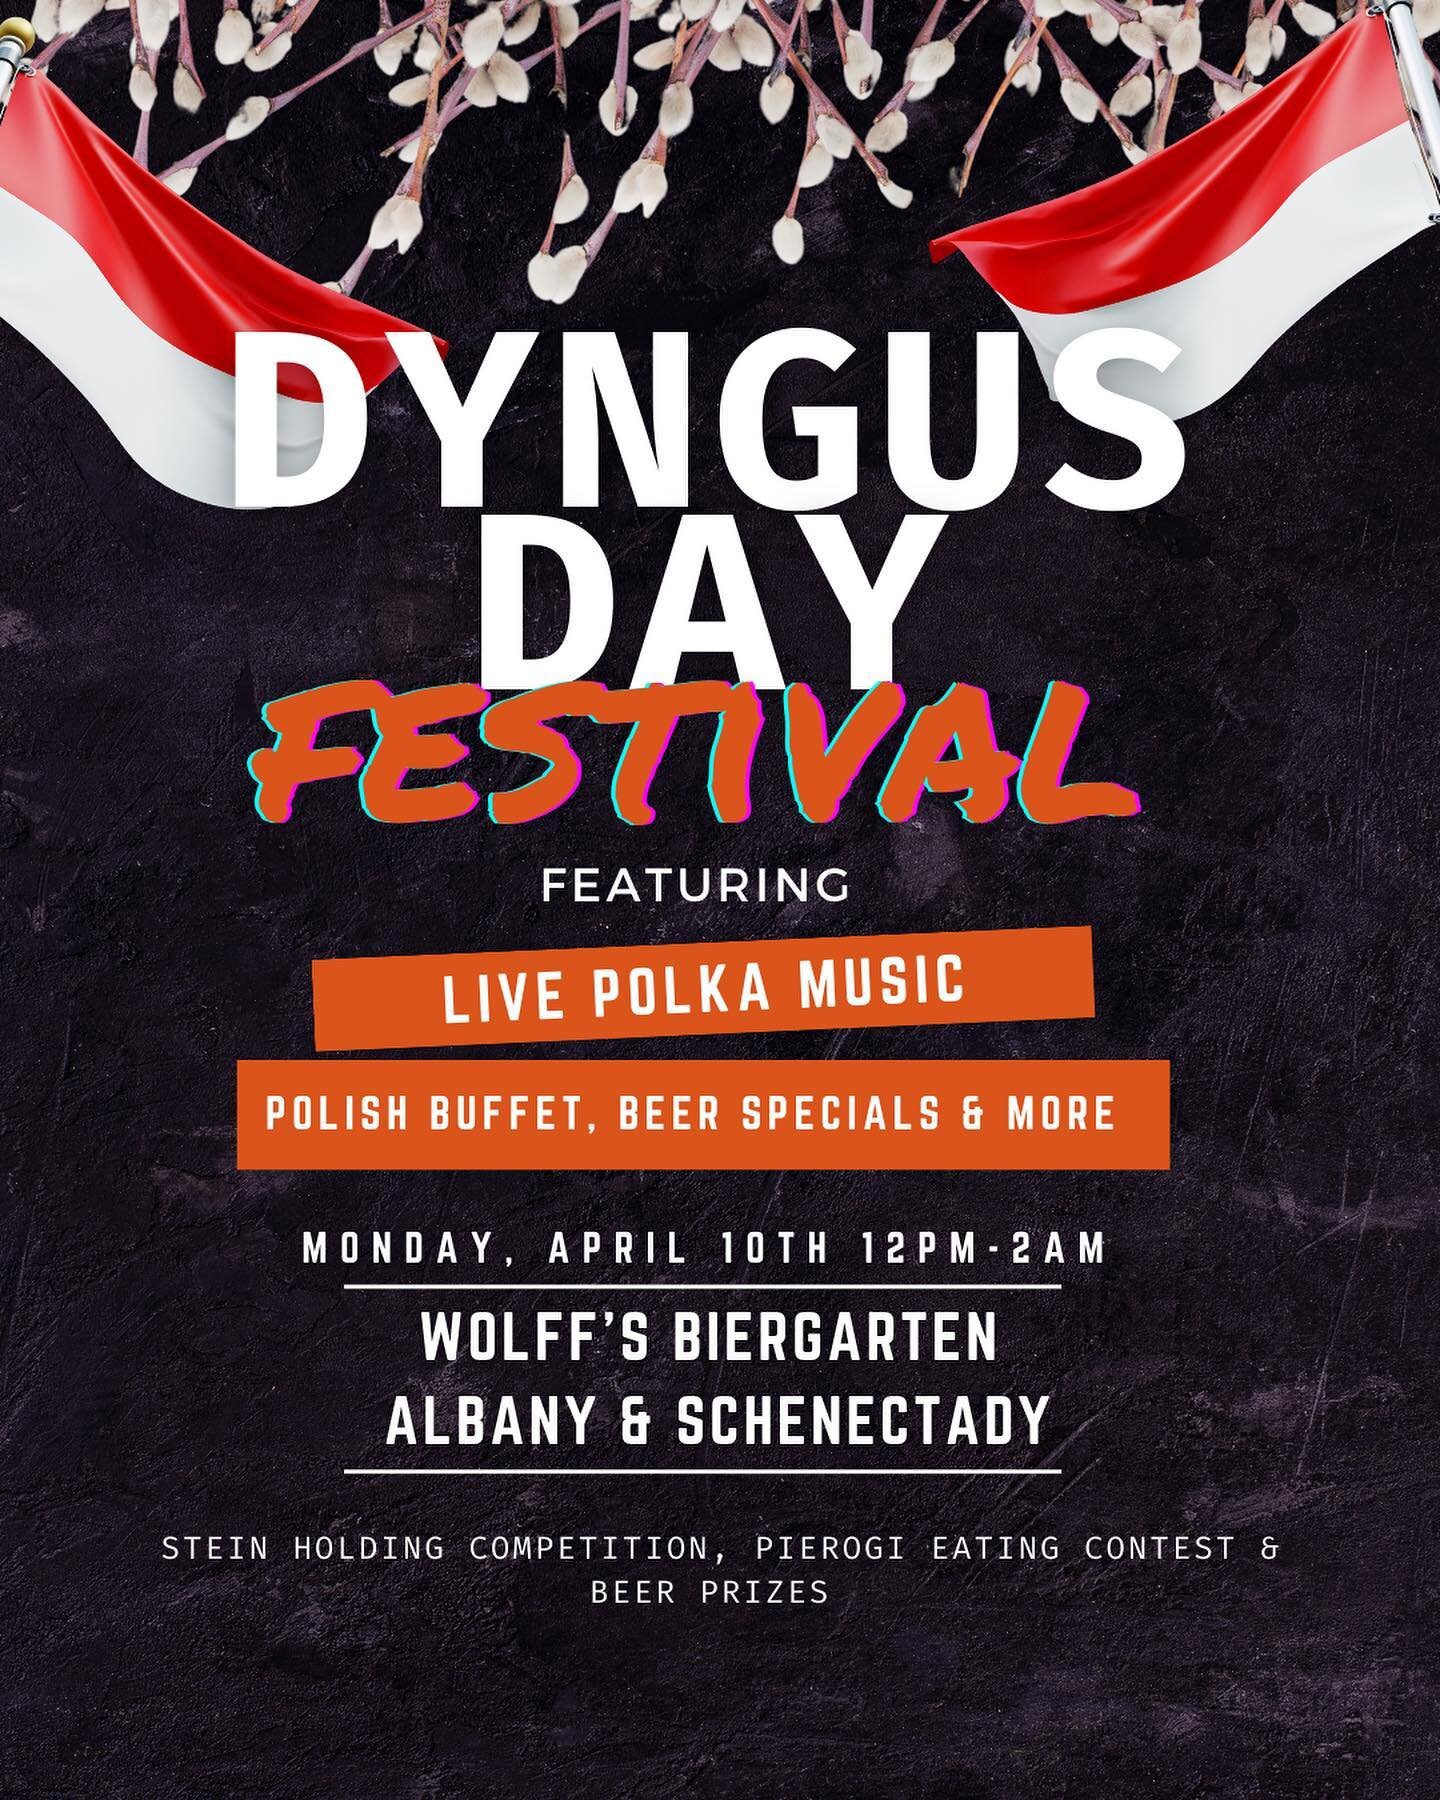 Come celebrate Dyngus Day with us! 🇵🇱 

Live polka music, $10 polish buffet and beer specials including $5 cans of Okocim &amp; $8 Zywiec draft